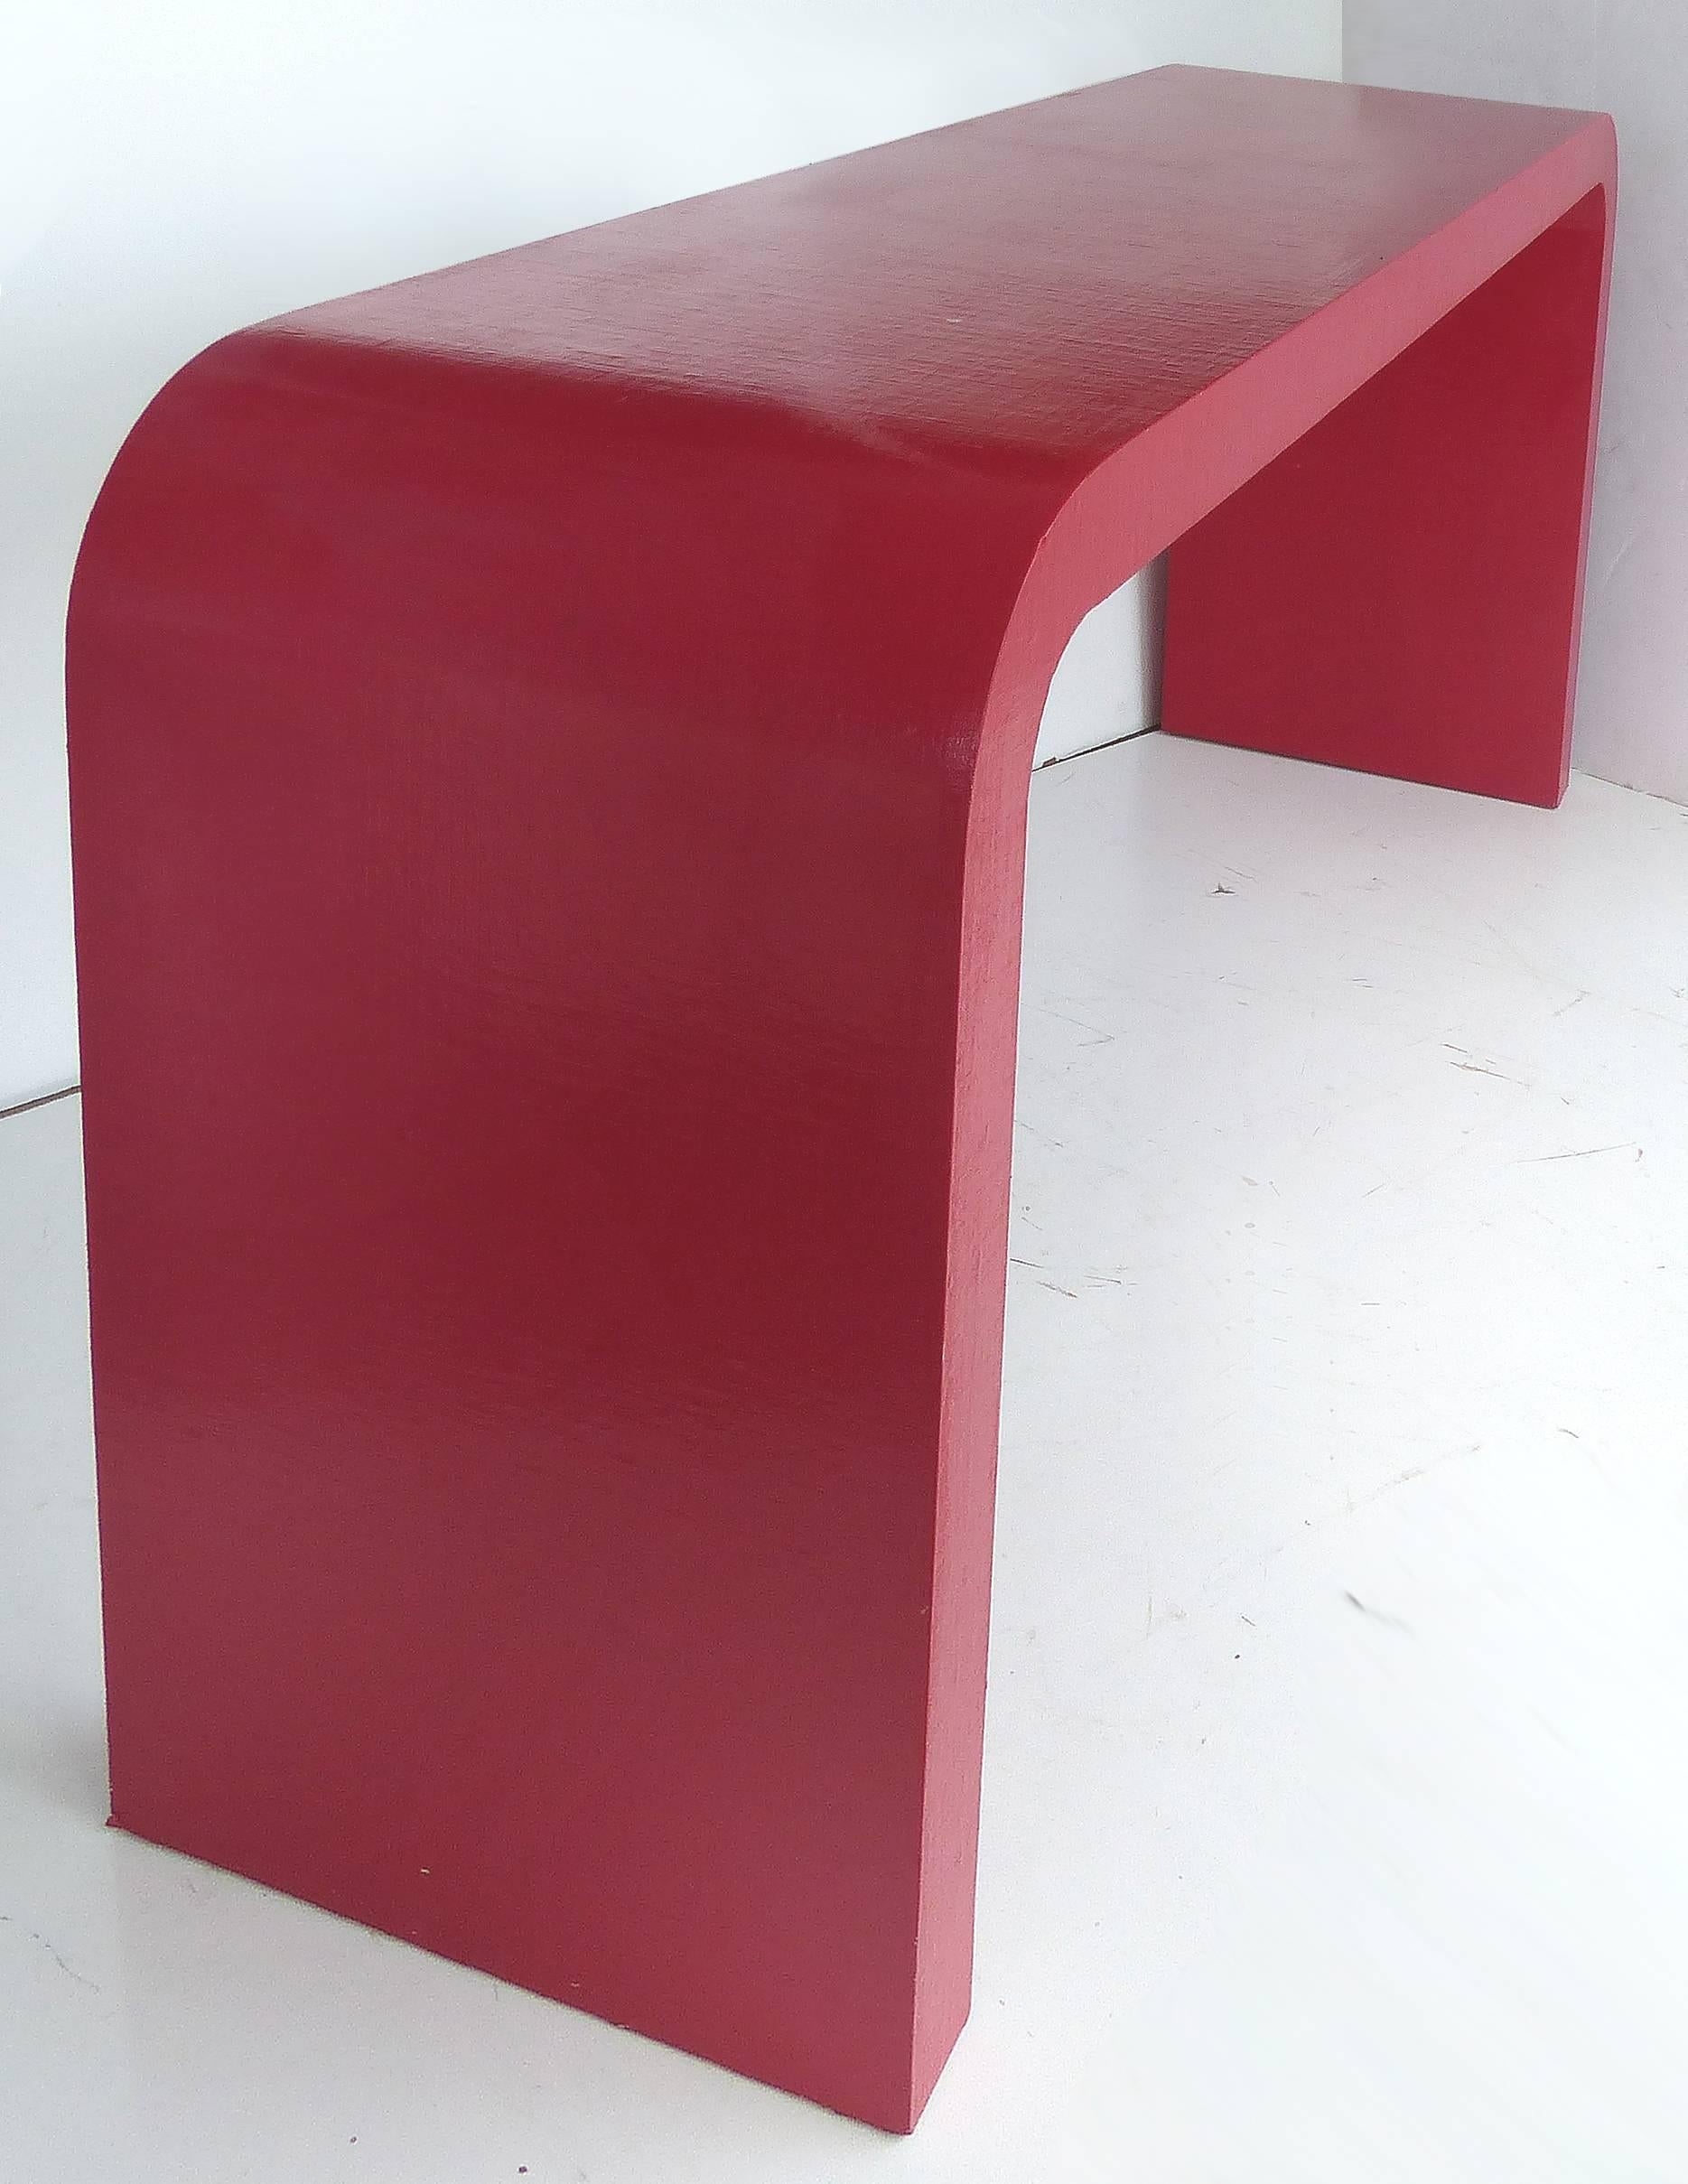 Offered for sale is an Karl Springer style linen clad waterfall console table in a fire engine red lacquer finish. Has some flakes to finish but could be painted or touched up at buyer's discretion.